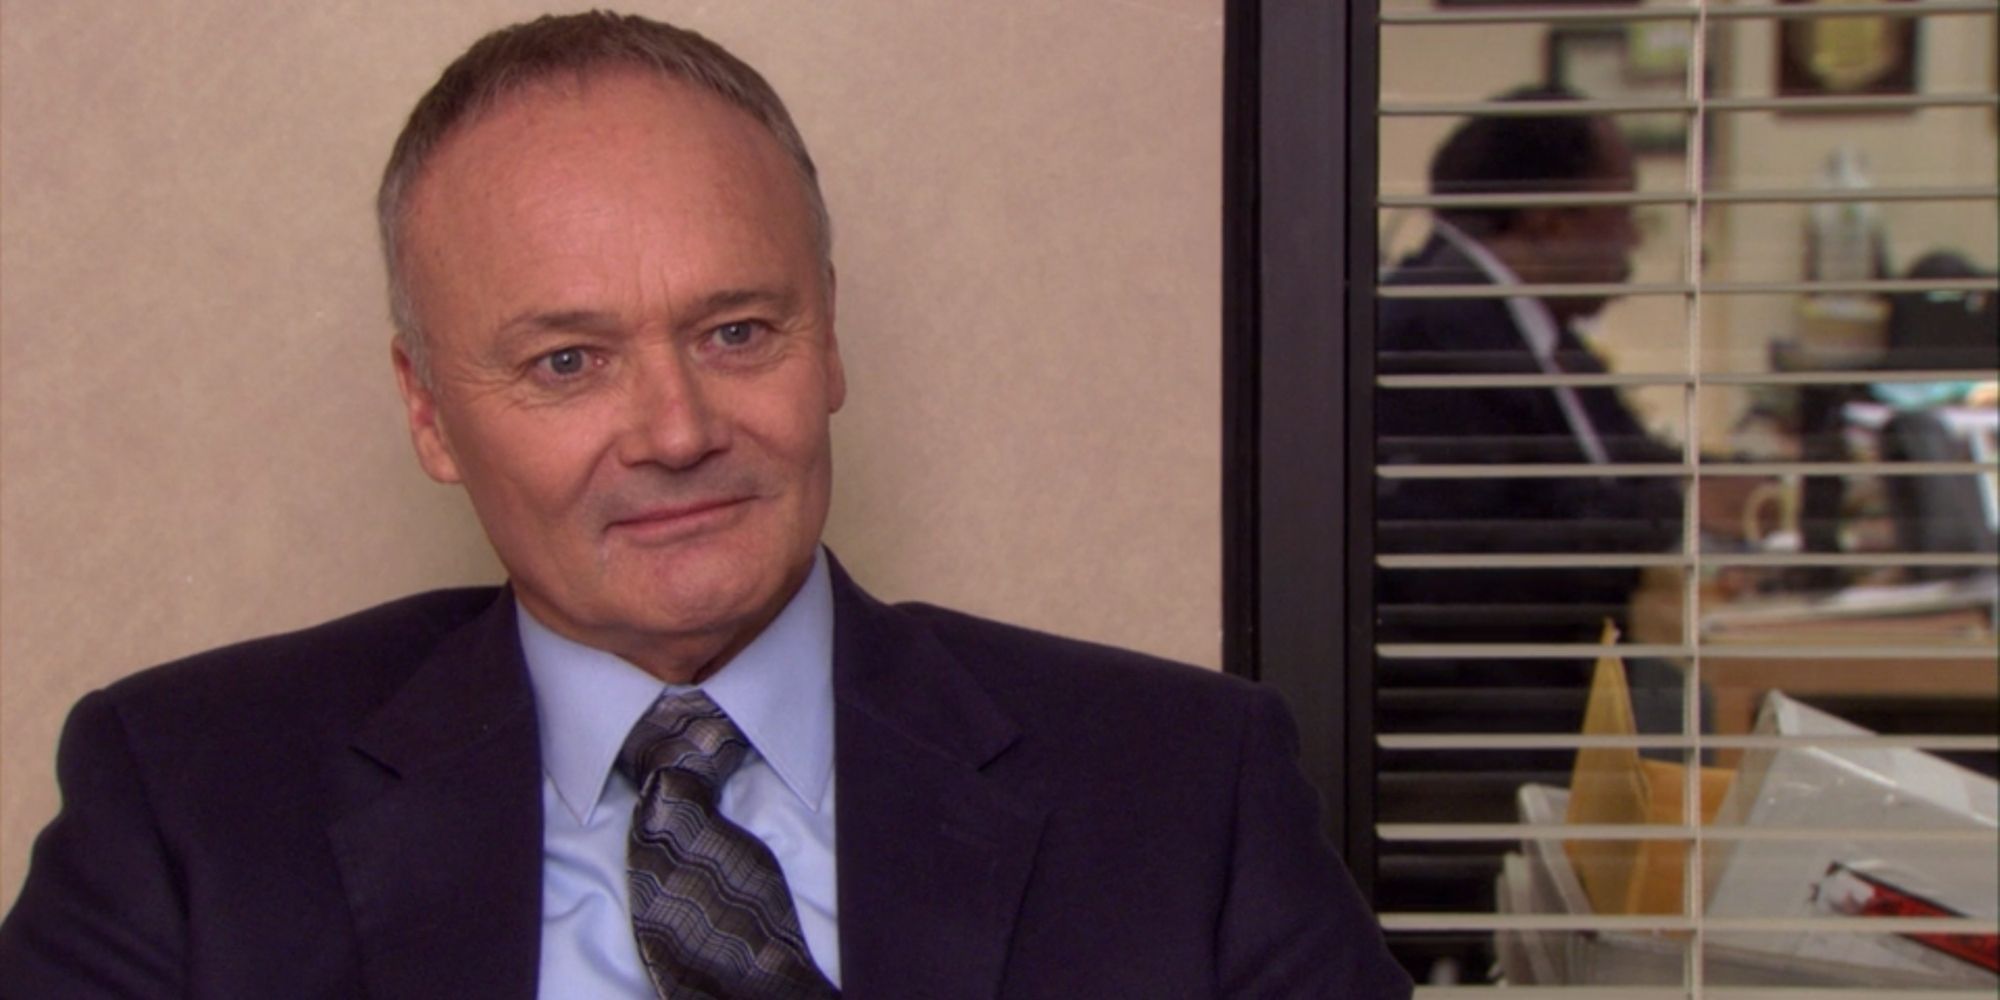 Creed from The Office.